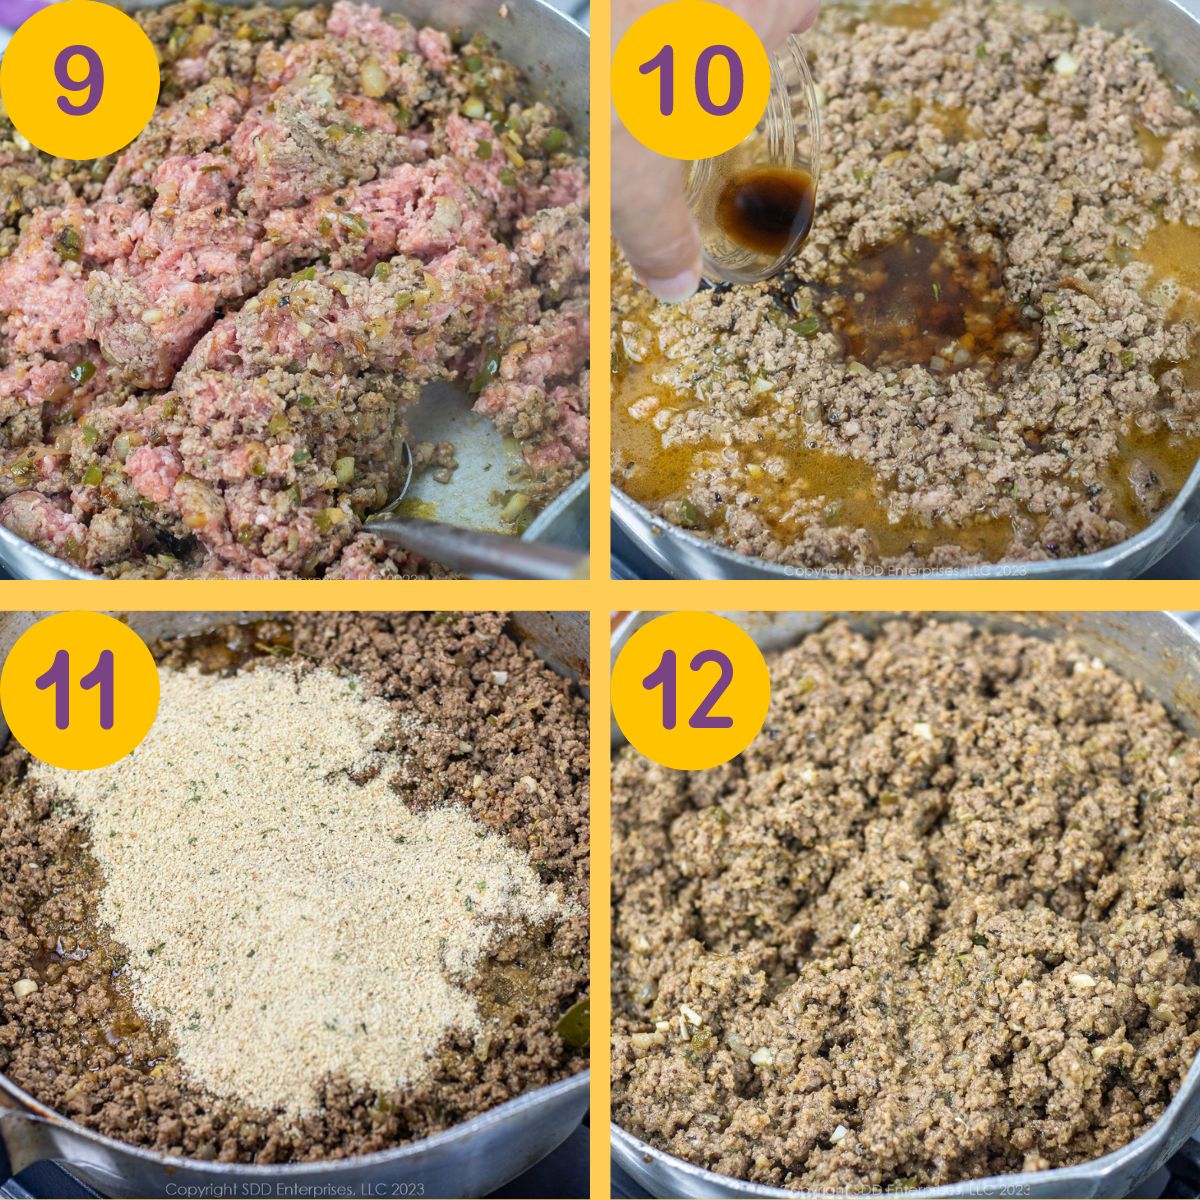 Steps for making a meat filling.